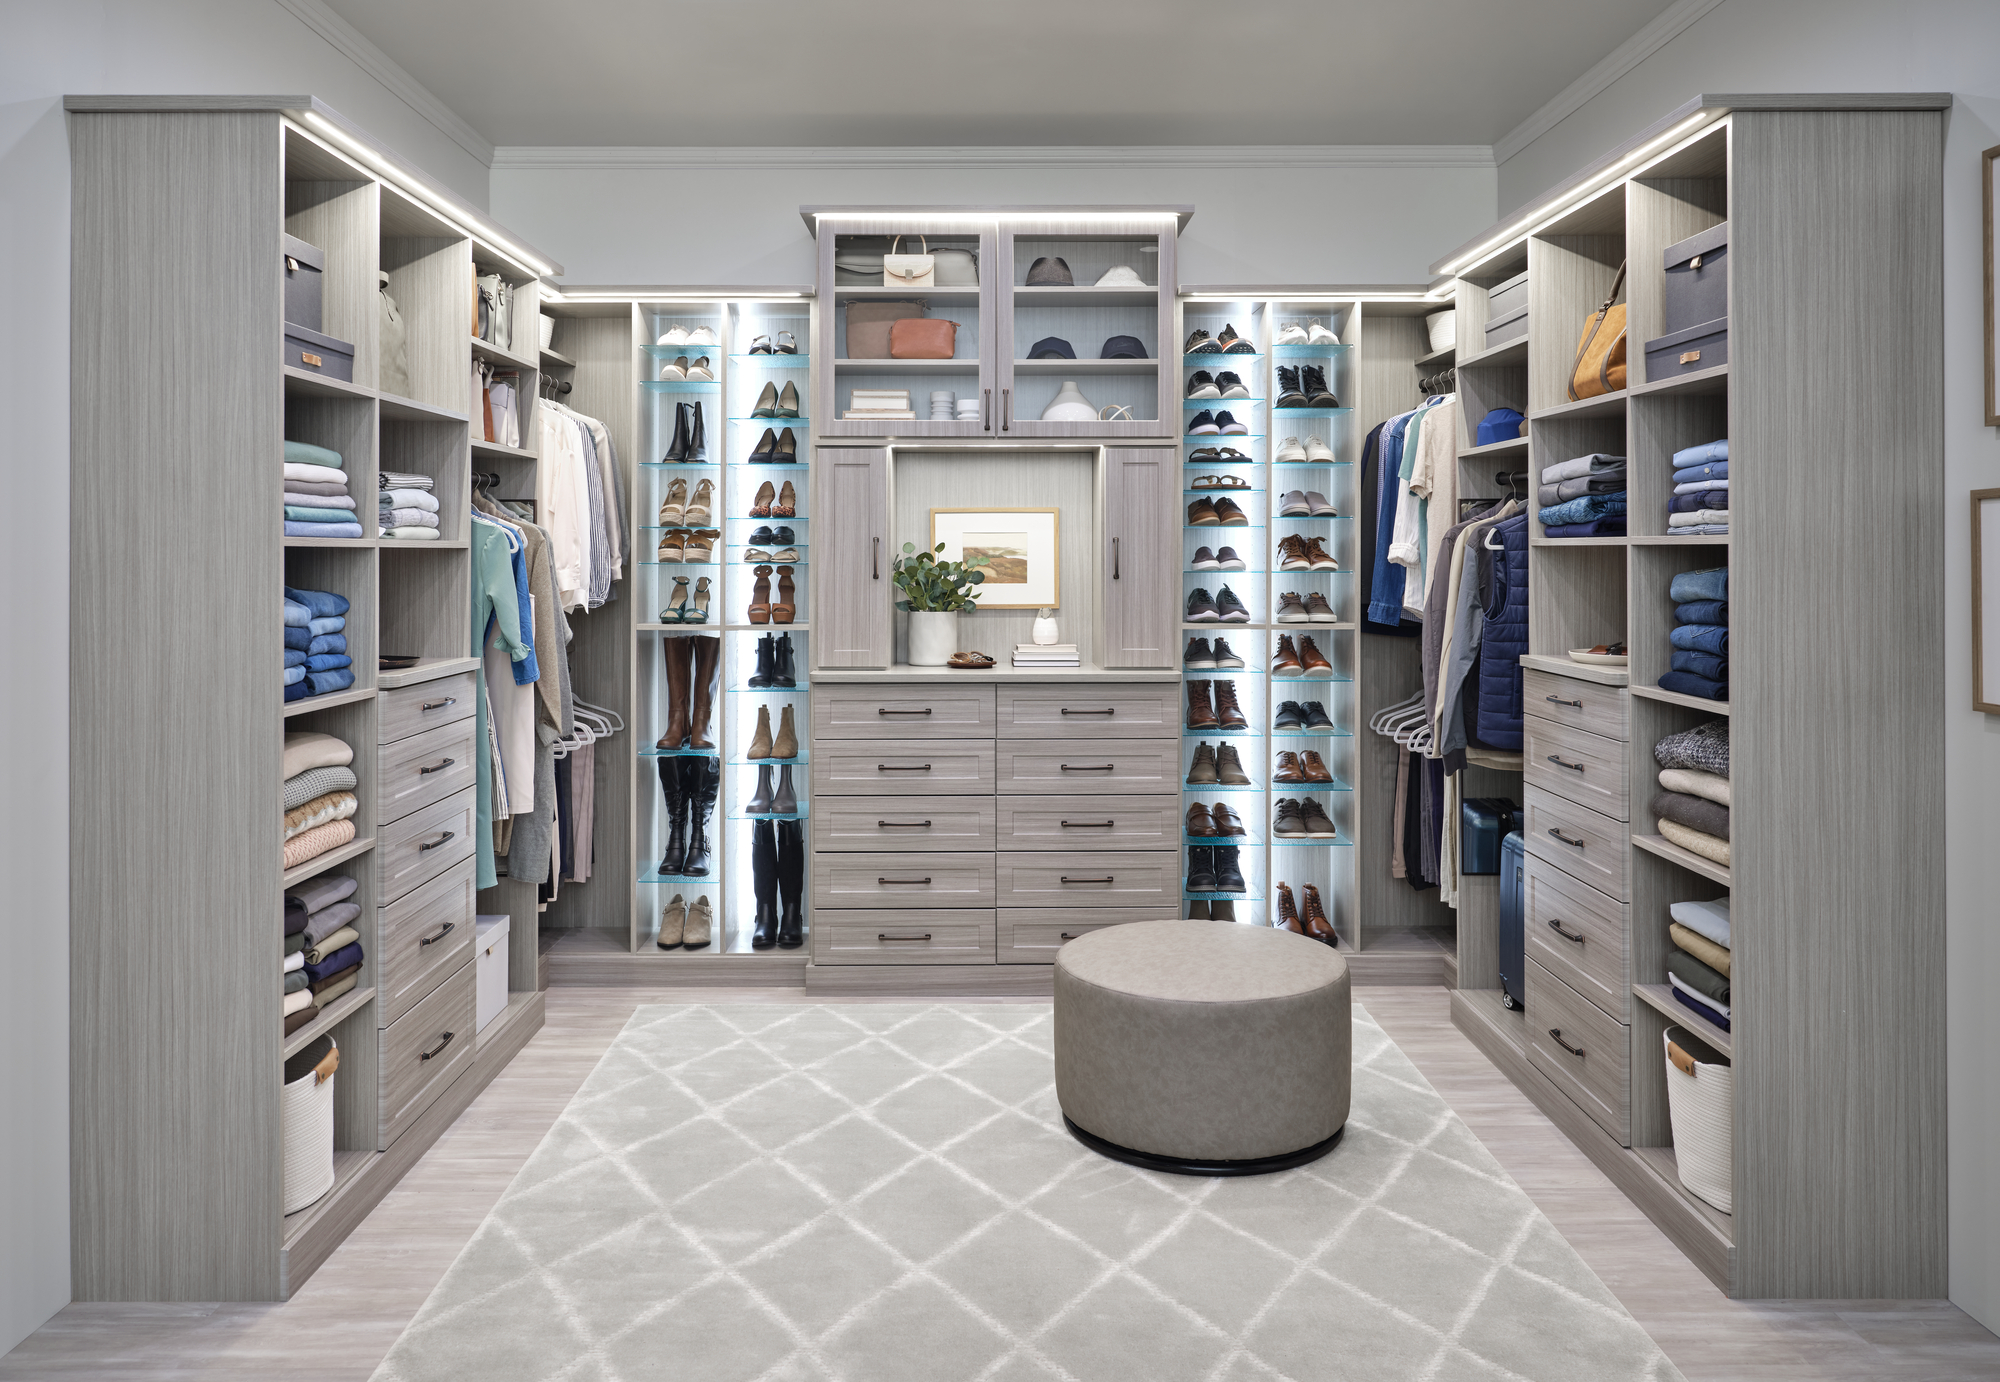 Large custom closet with new custom lighting and adjustable shoe shelves in timber grey